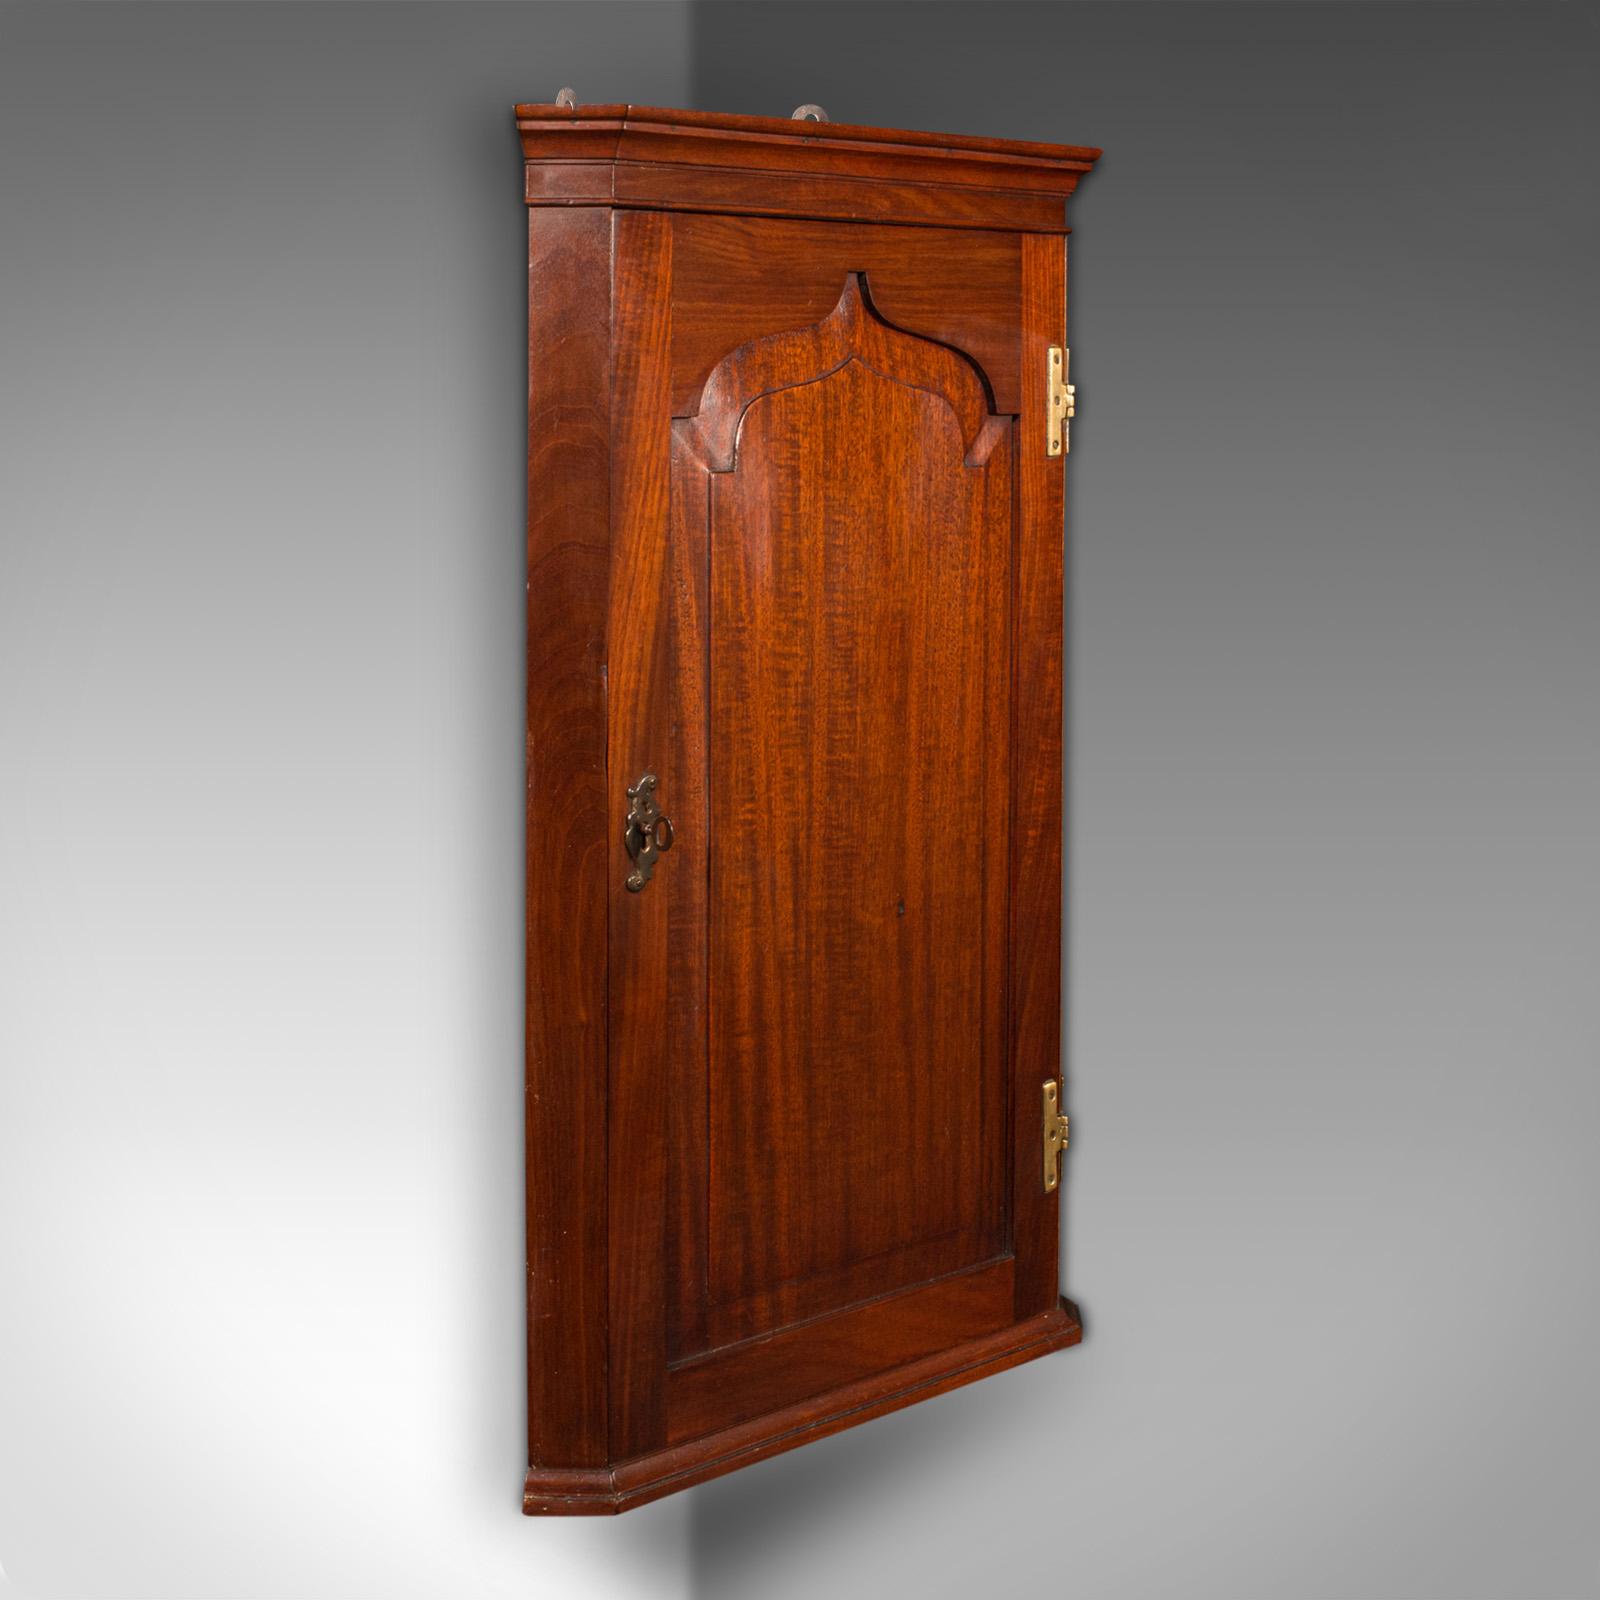 This is an antique corner cabinet. An English, mahogany cupboard with Georgian revival taste, dating to the late Victoria period, circa 1880.

Delightfully figured cabinet with a bright painted interior
Displaying a desirable aged patina and in